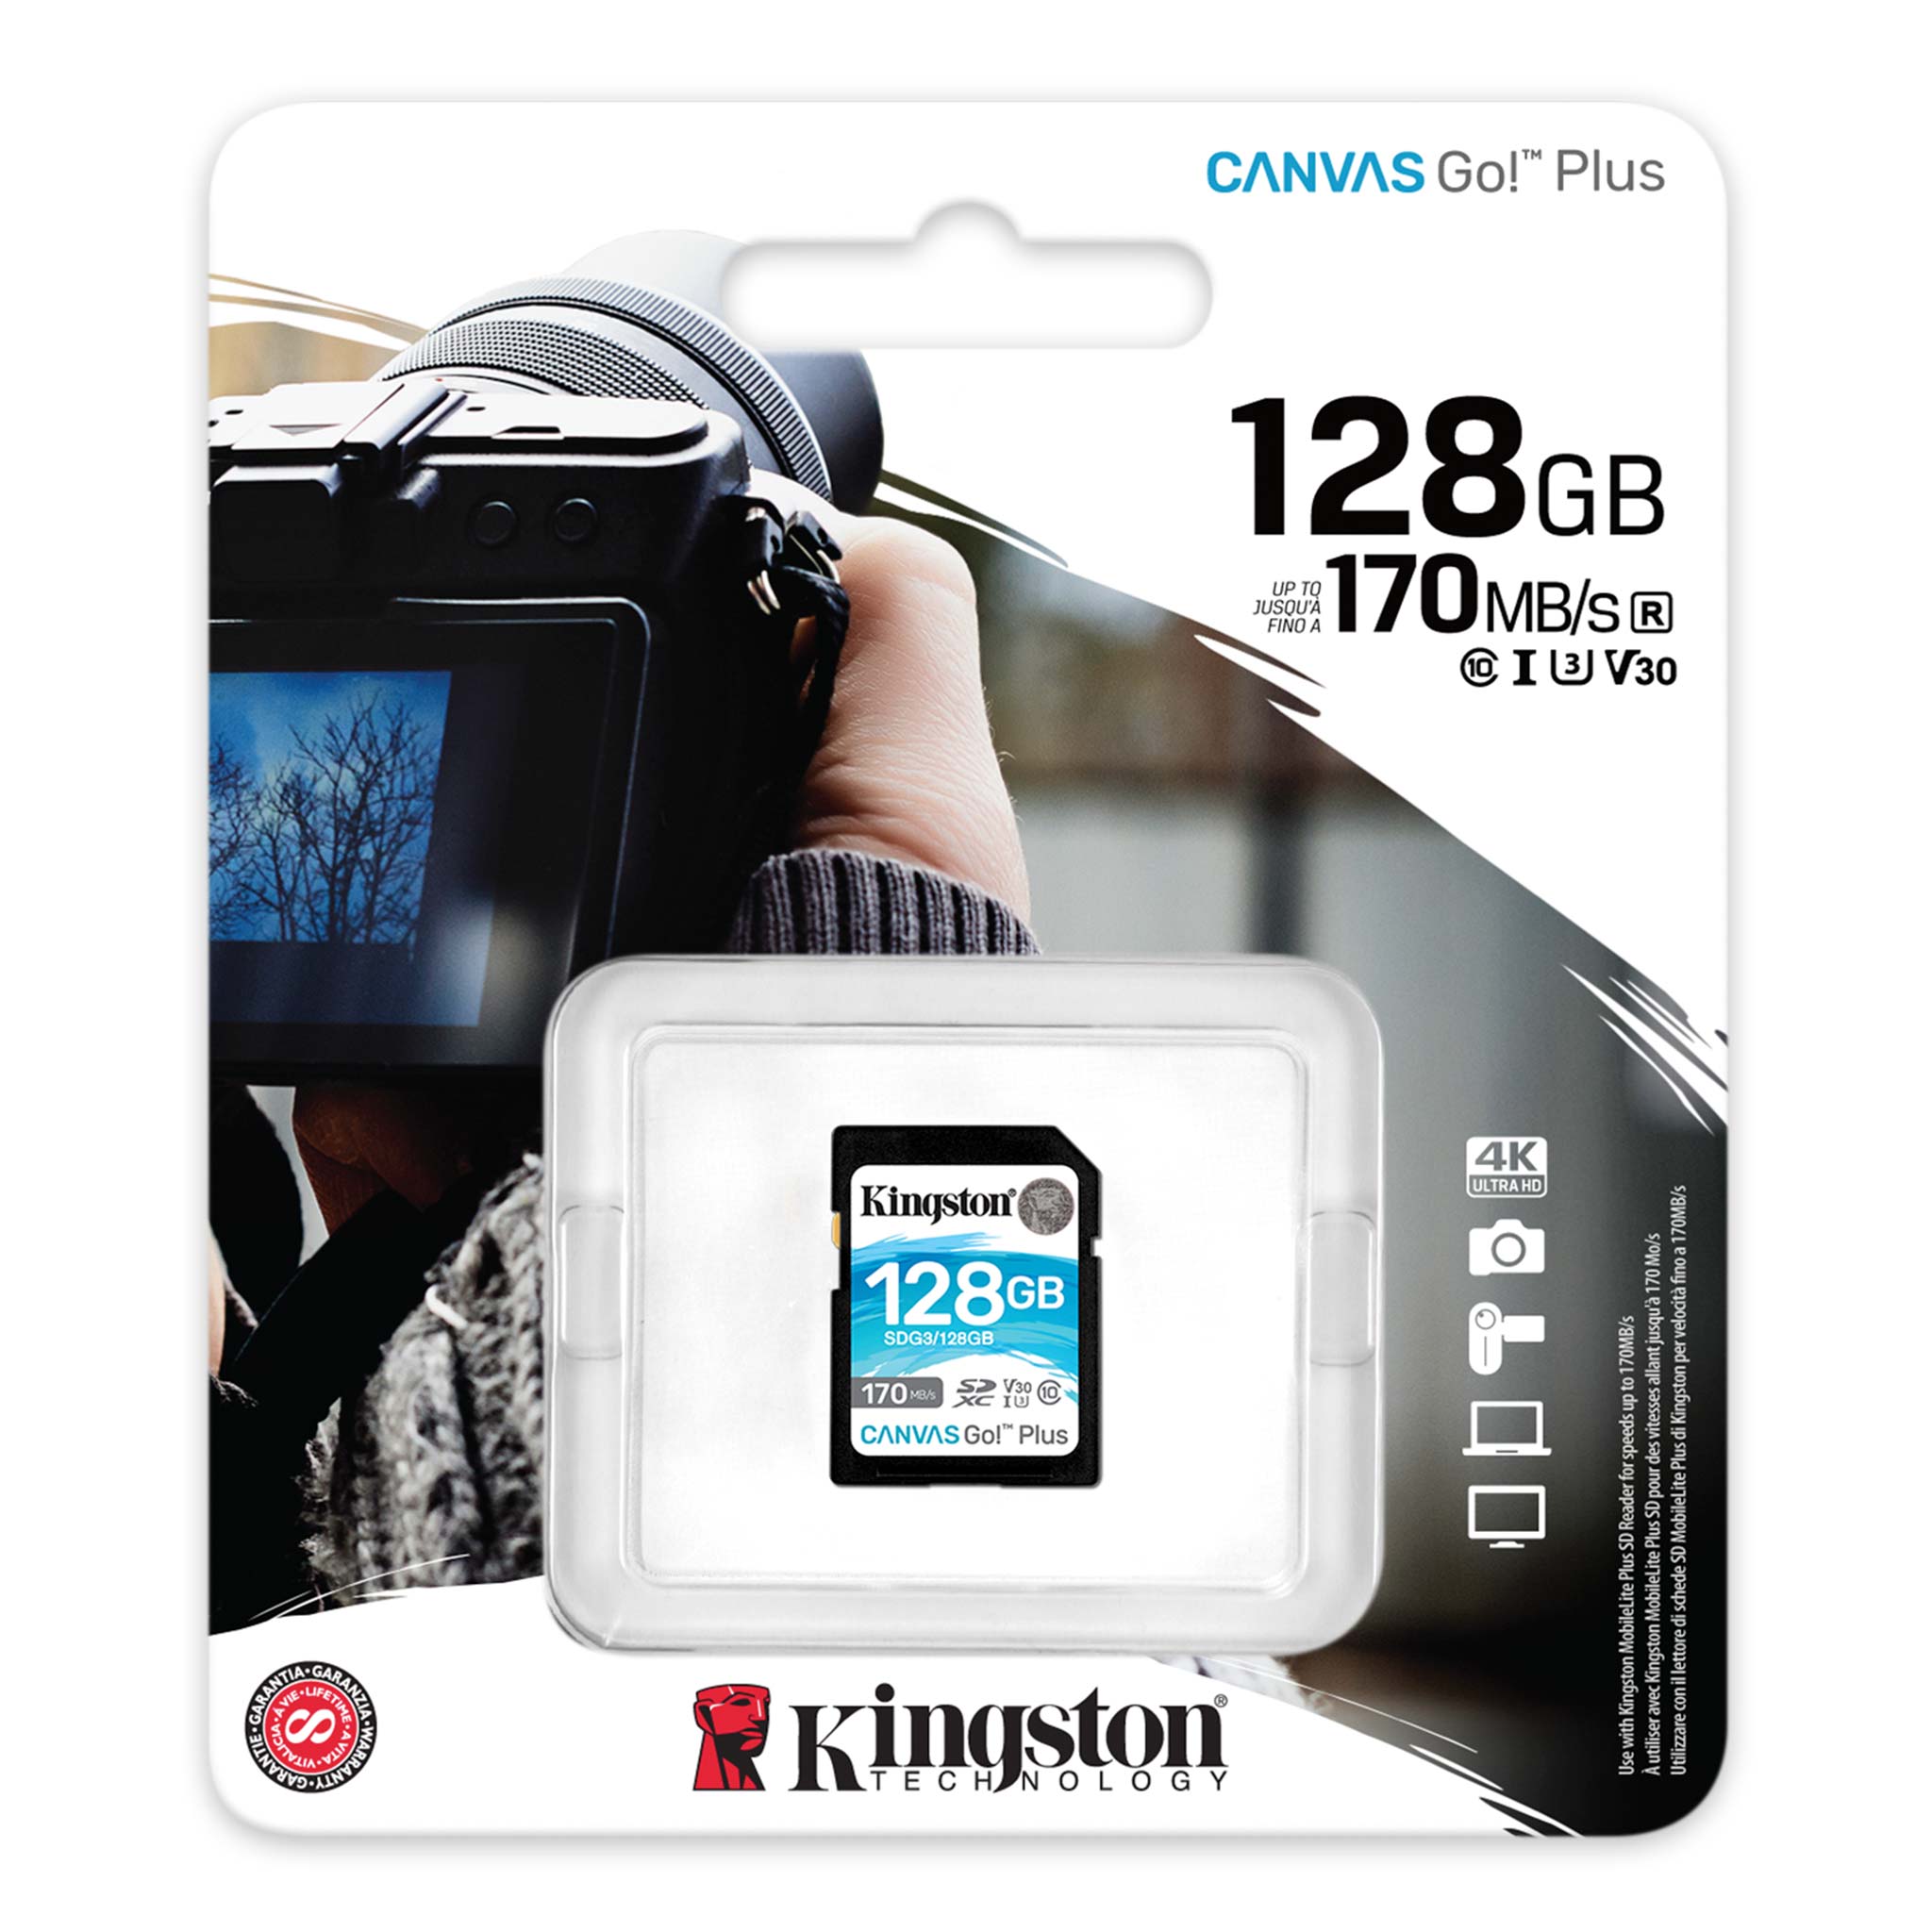 Kingston 64GB Nokia 150 MicroSDXC Canvas Select Plus Card Verified by SanFlash. 100MBs Works with Kingston 